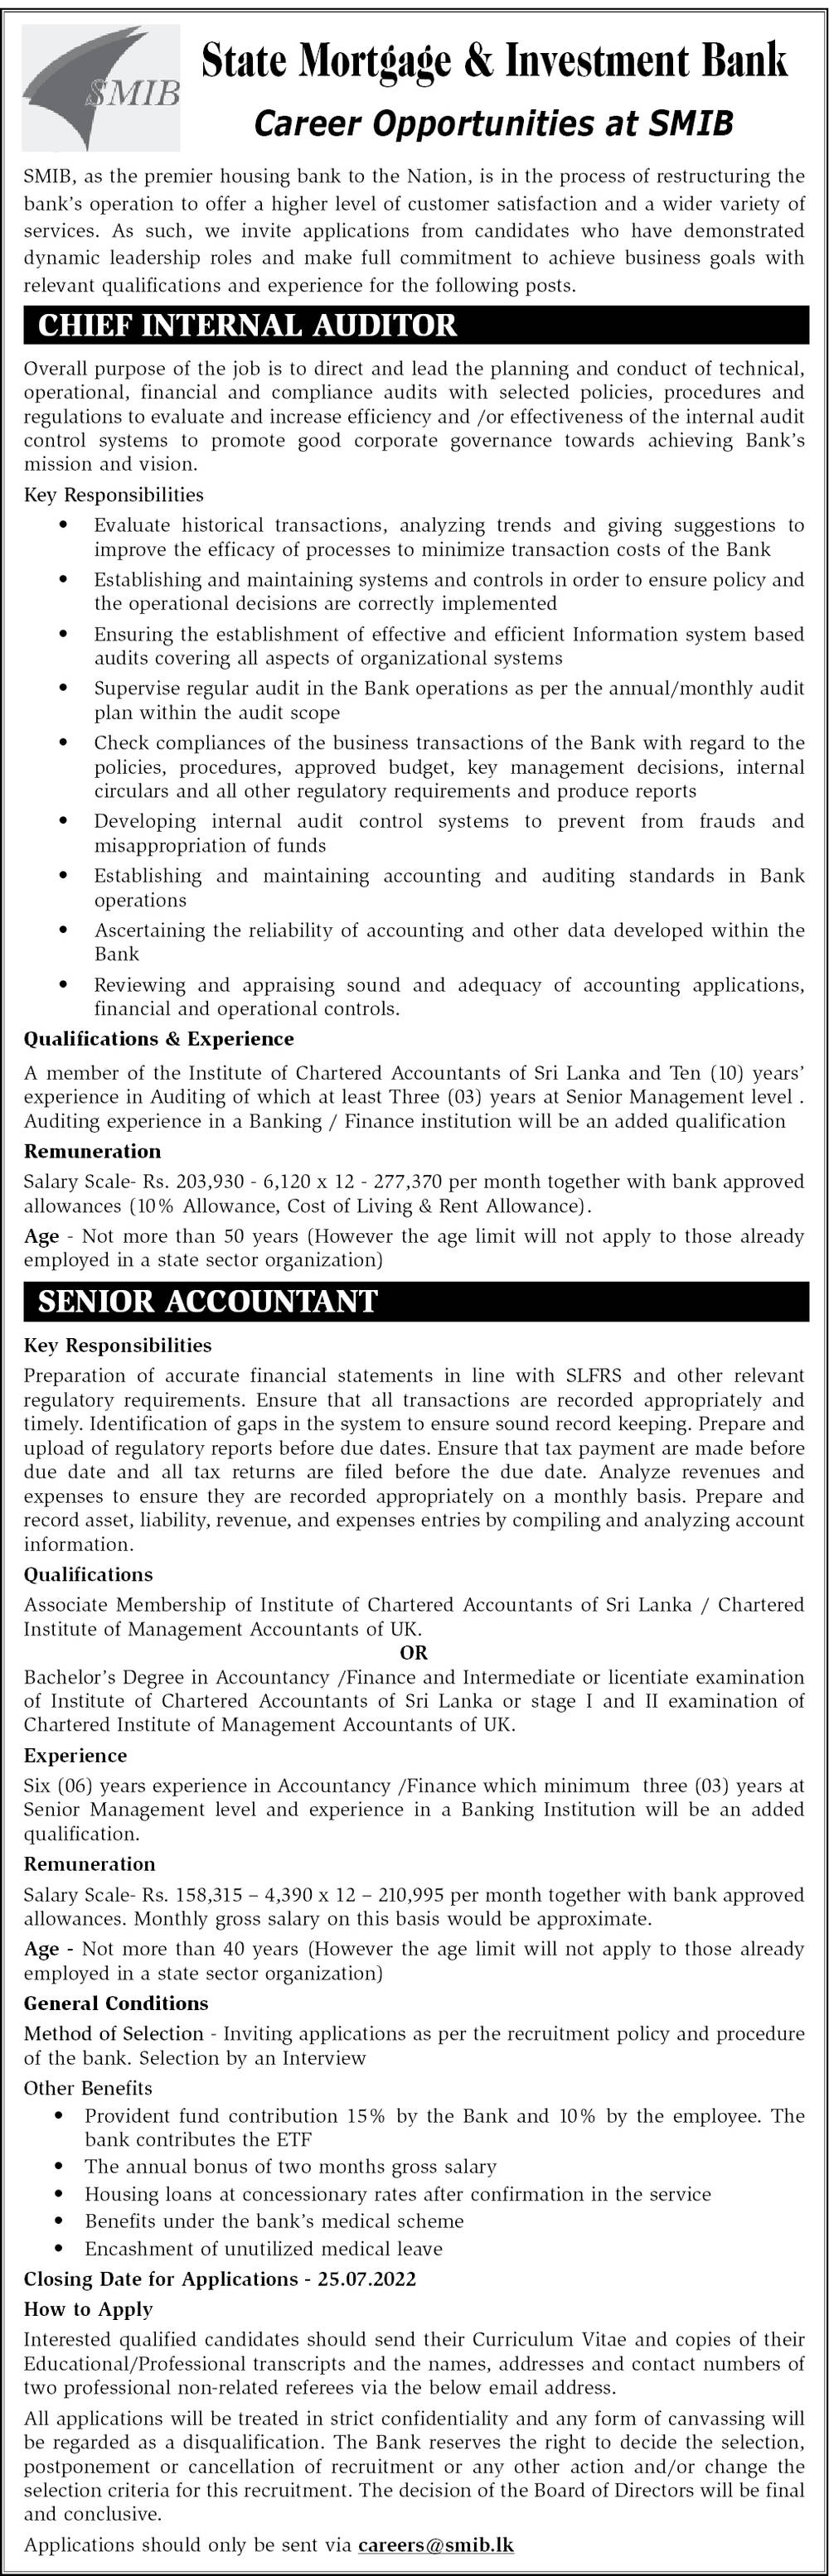 Chief Internal Auditor, Senior Accountant - State Mortgage and investment bank